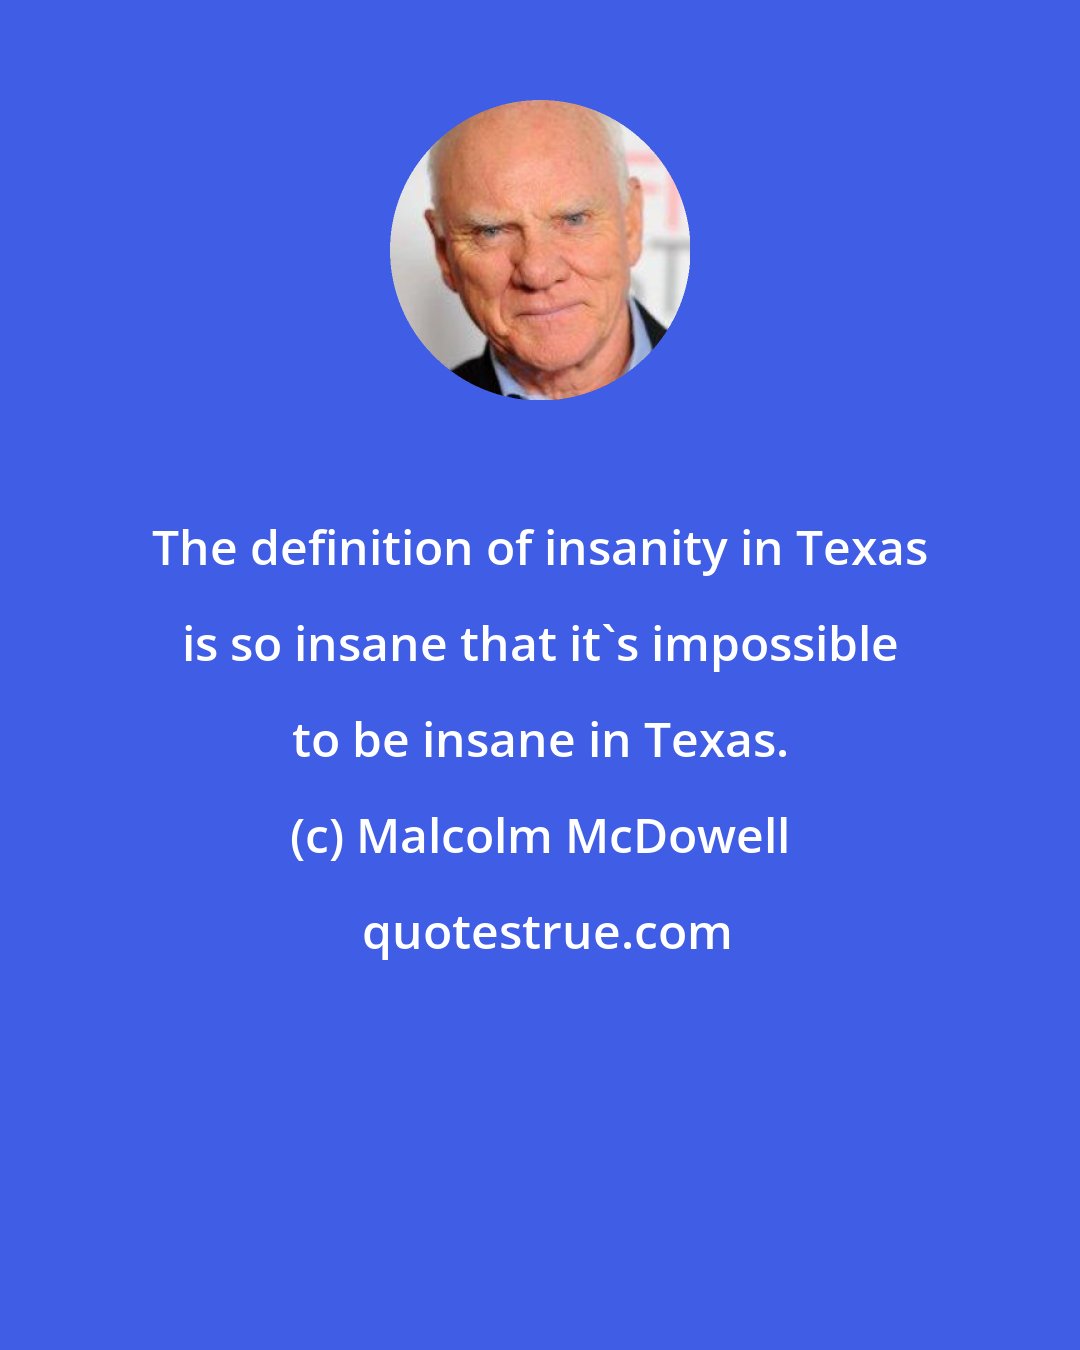 Malcolm McDowell: The definition of insanity in Texas is so insane that it's impossible to be insane in Texas.